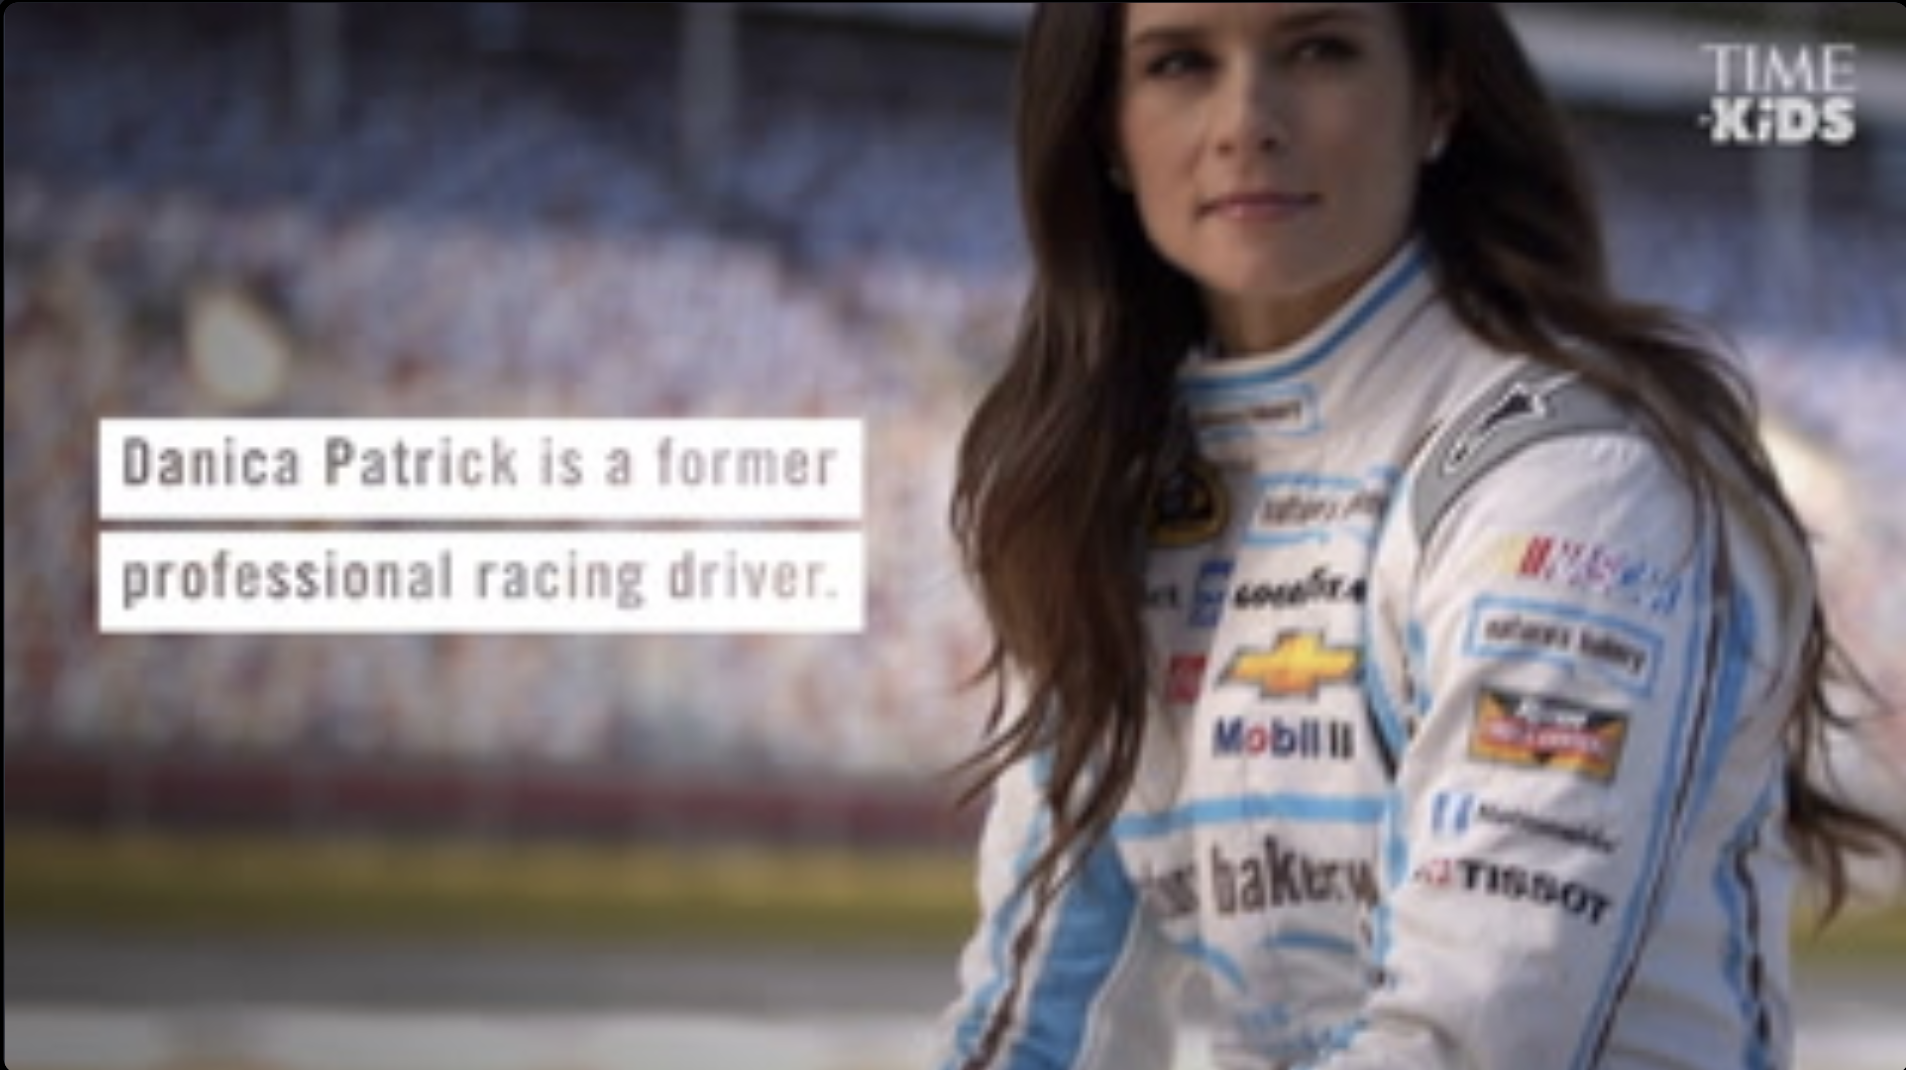 Danica Patrick seated in her racing uniform pictured from the waist up with a caption overlay that reads, "Danica Patrick is a former professional racing driver". 